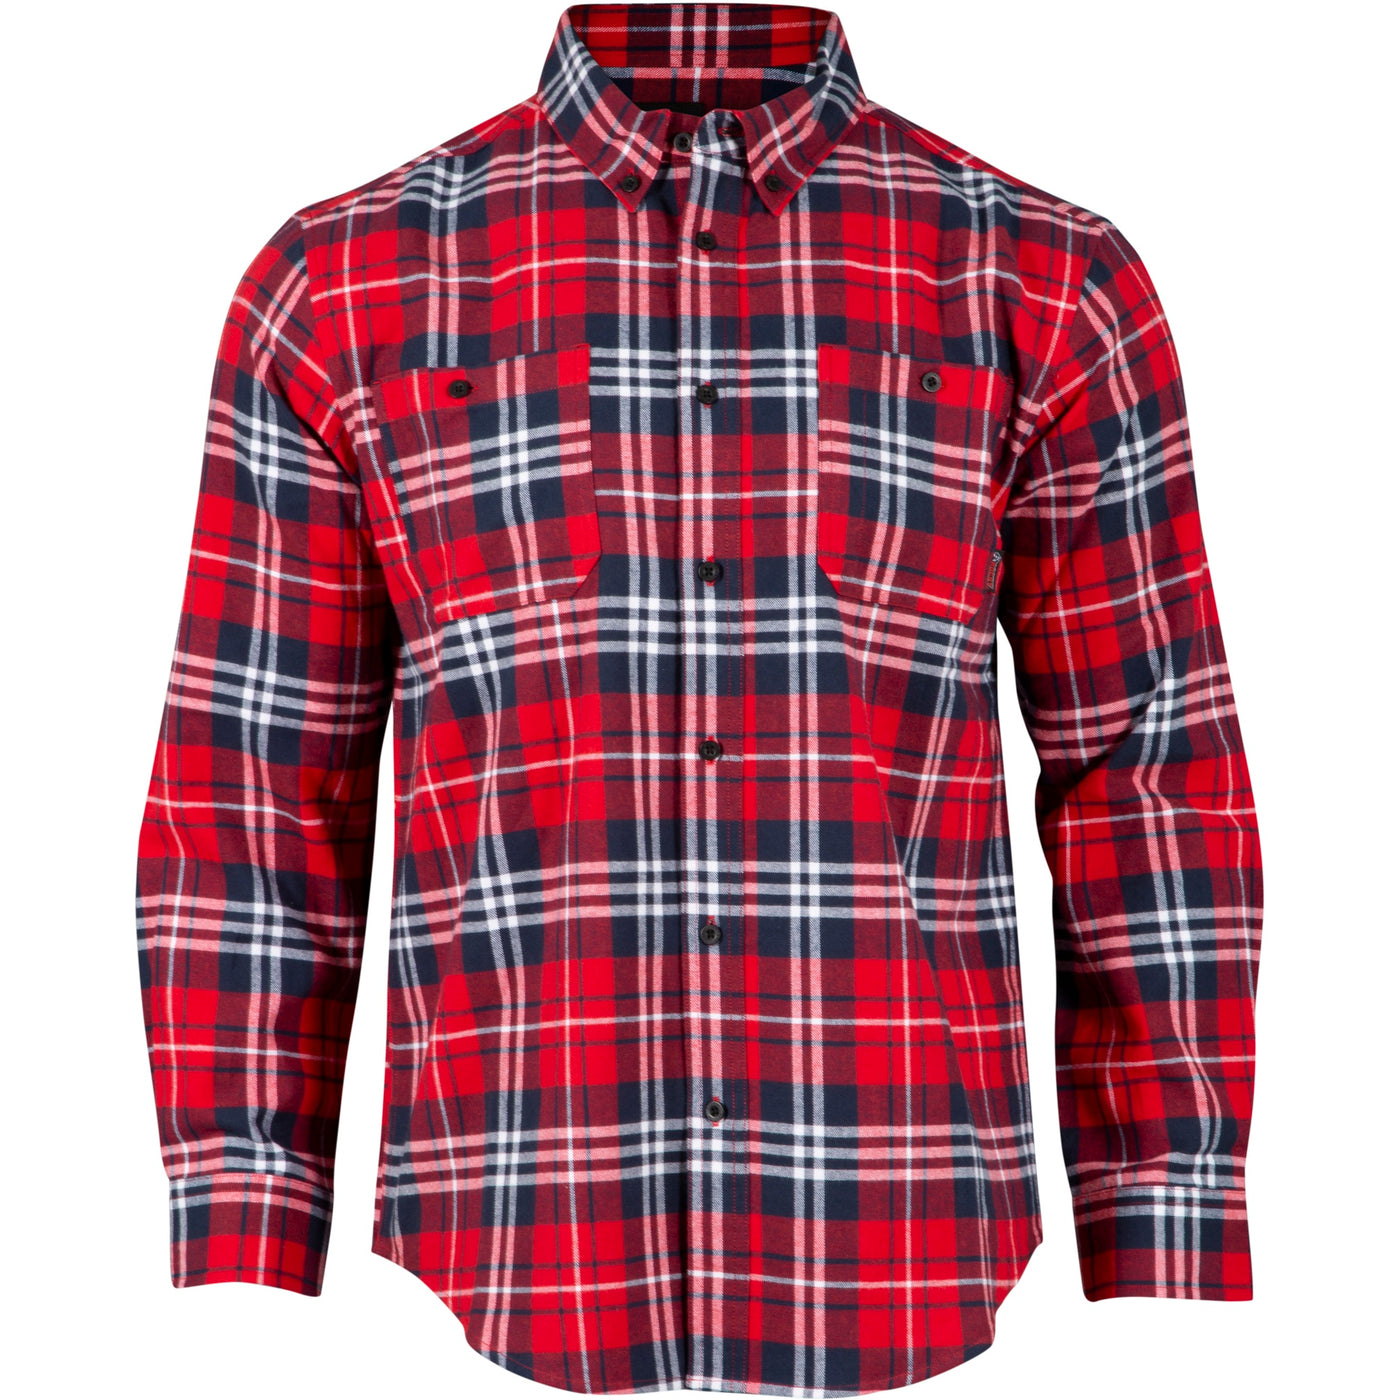 Rocky Worksmart Button Down Work Shirt | Red Plaid - Outback Traders Australia